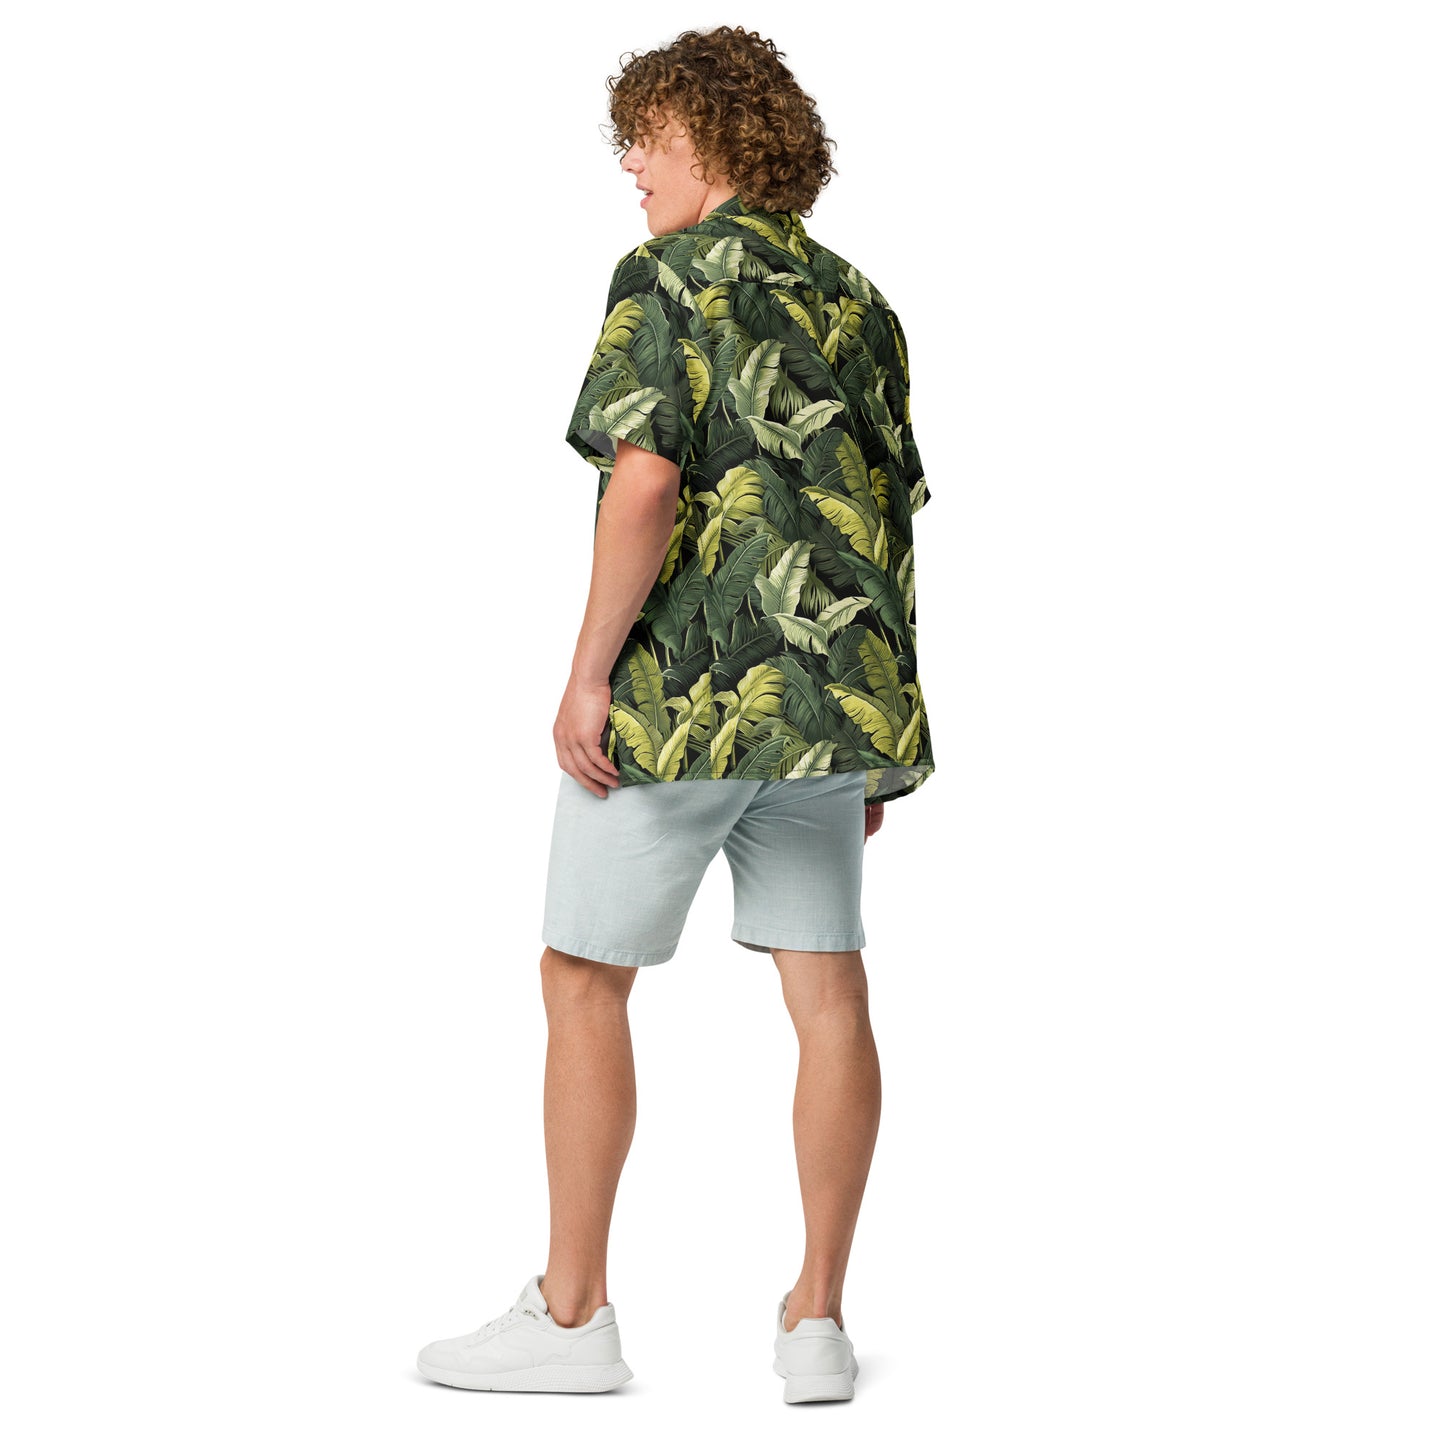 Tropical Short Sleeve Men Button Up Shirt, Green Leaves Unisex Women Moisture Wicking Print Casual Buttoned Down Summer Collared Plus Size Starcove Fashion